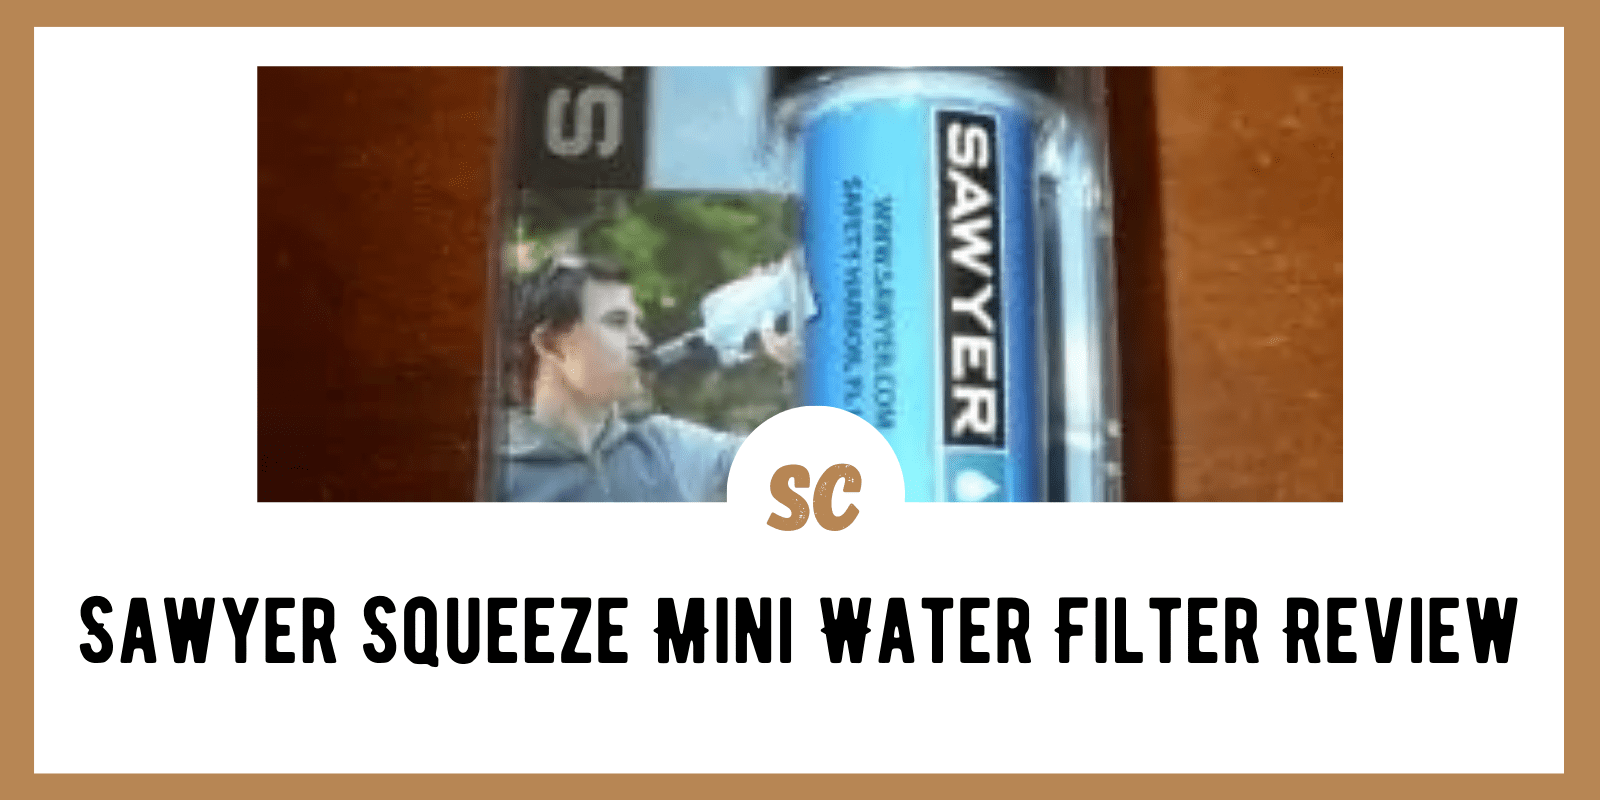 Sawyer Squeeze Mini Water Filter Review for 2021